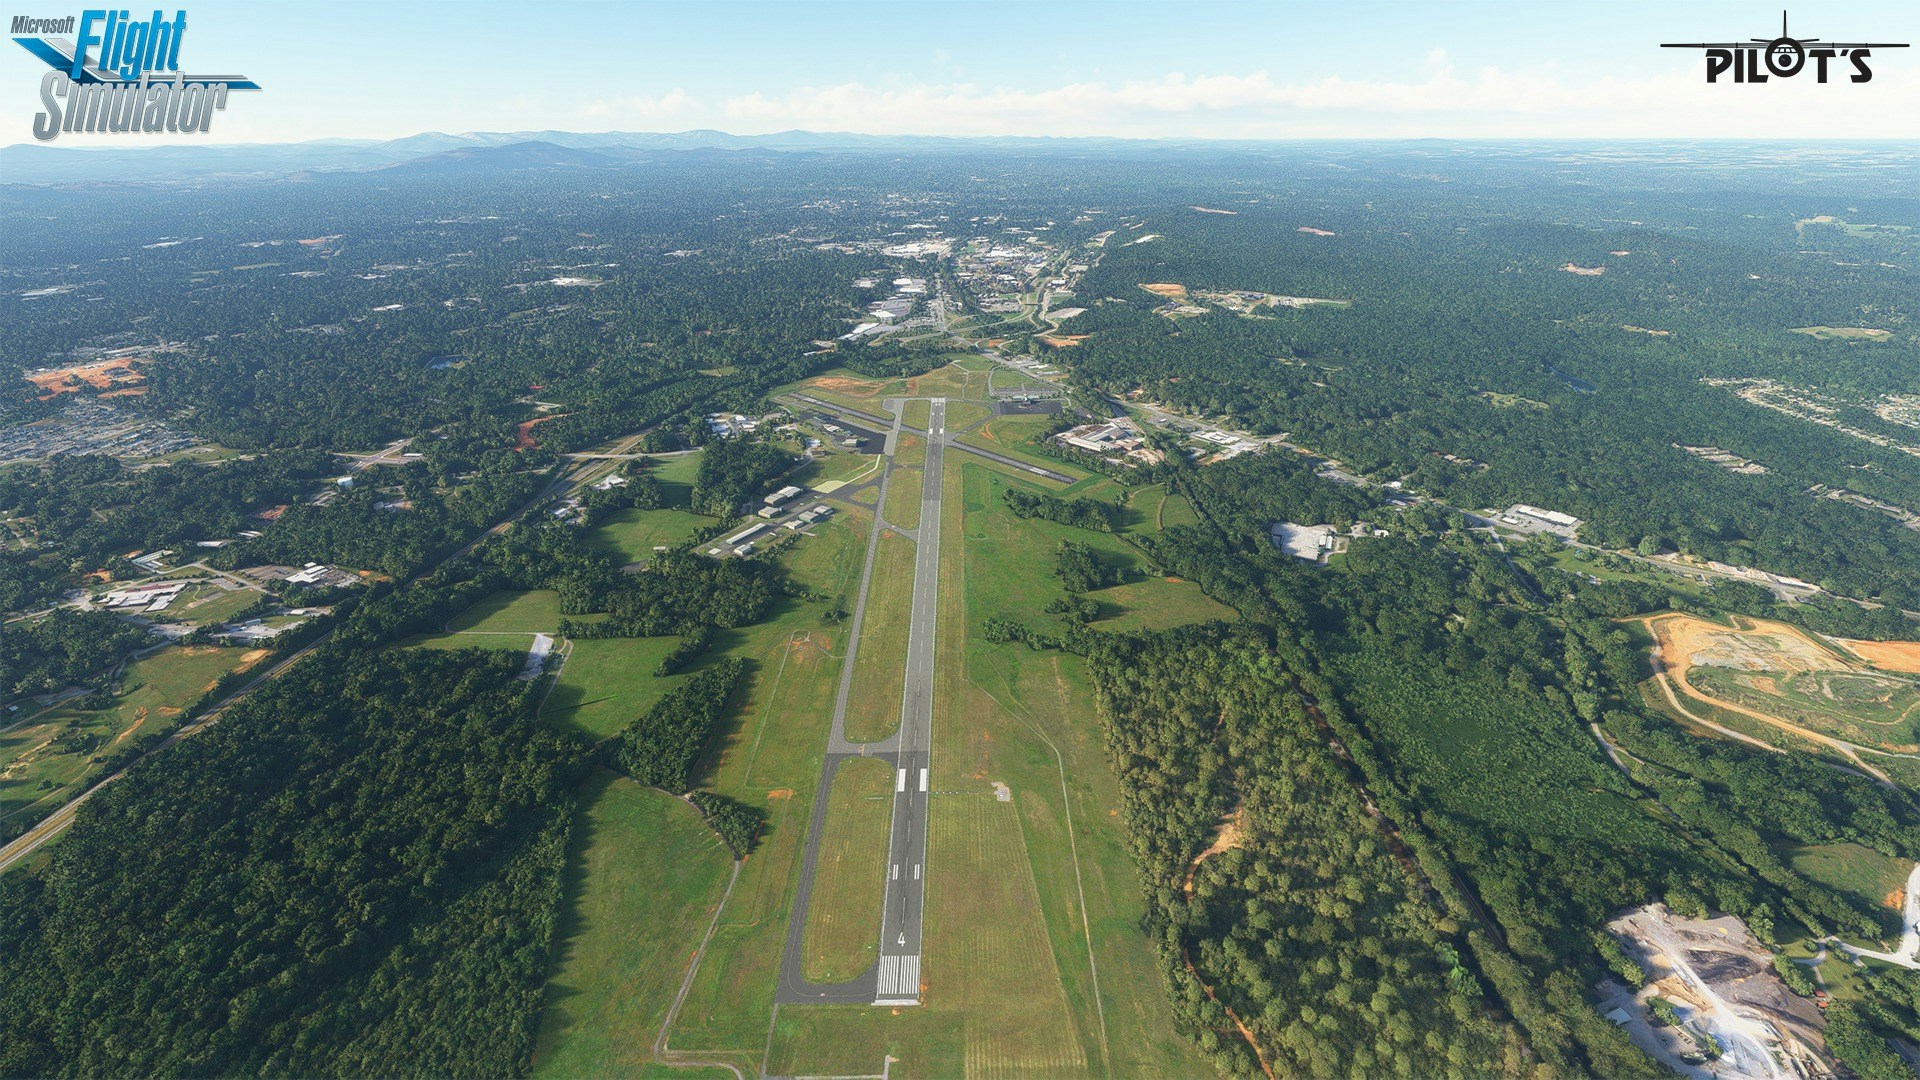 PILOT'S releases Lynchburg Regional Airport for MSFS